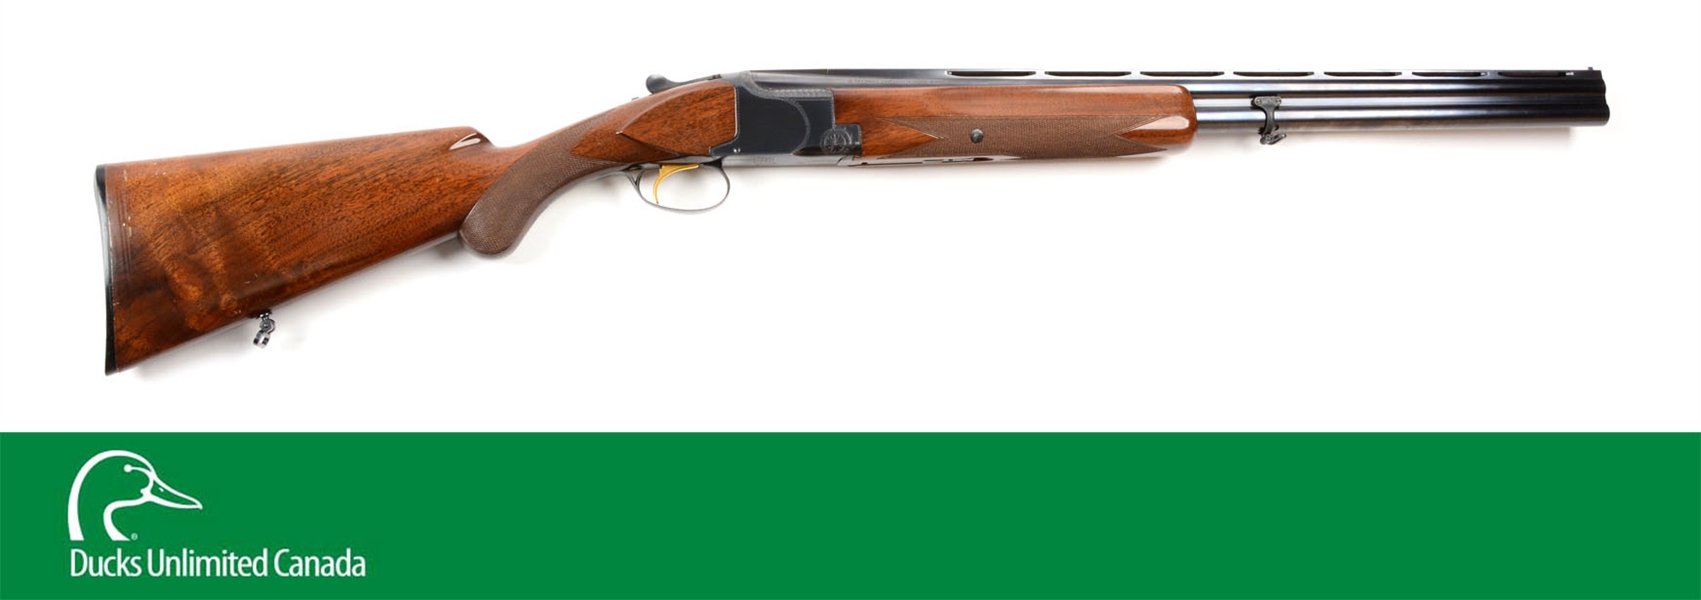 (M^) BELGIAN BROWNING SUPERPOSED OVER AND UNDER 12 BORE SHOTGUN.